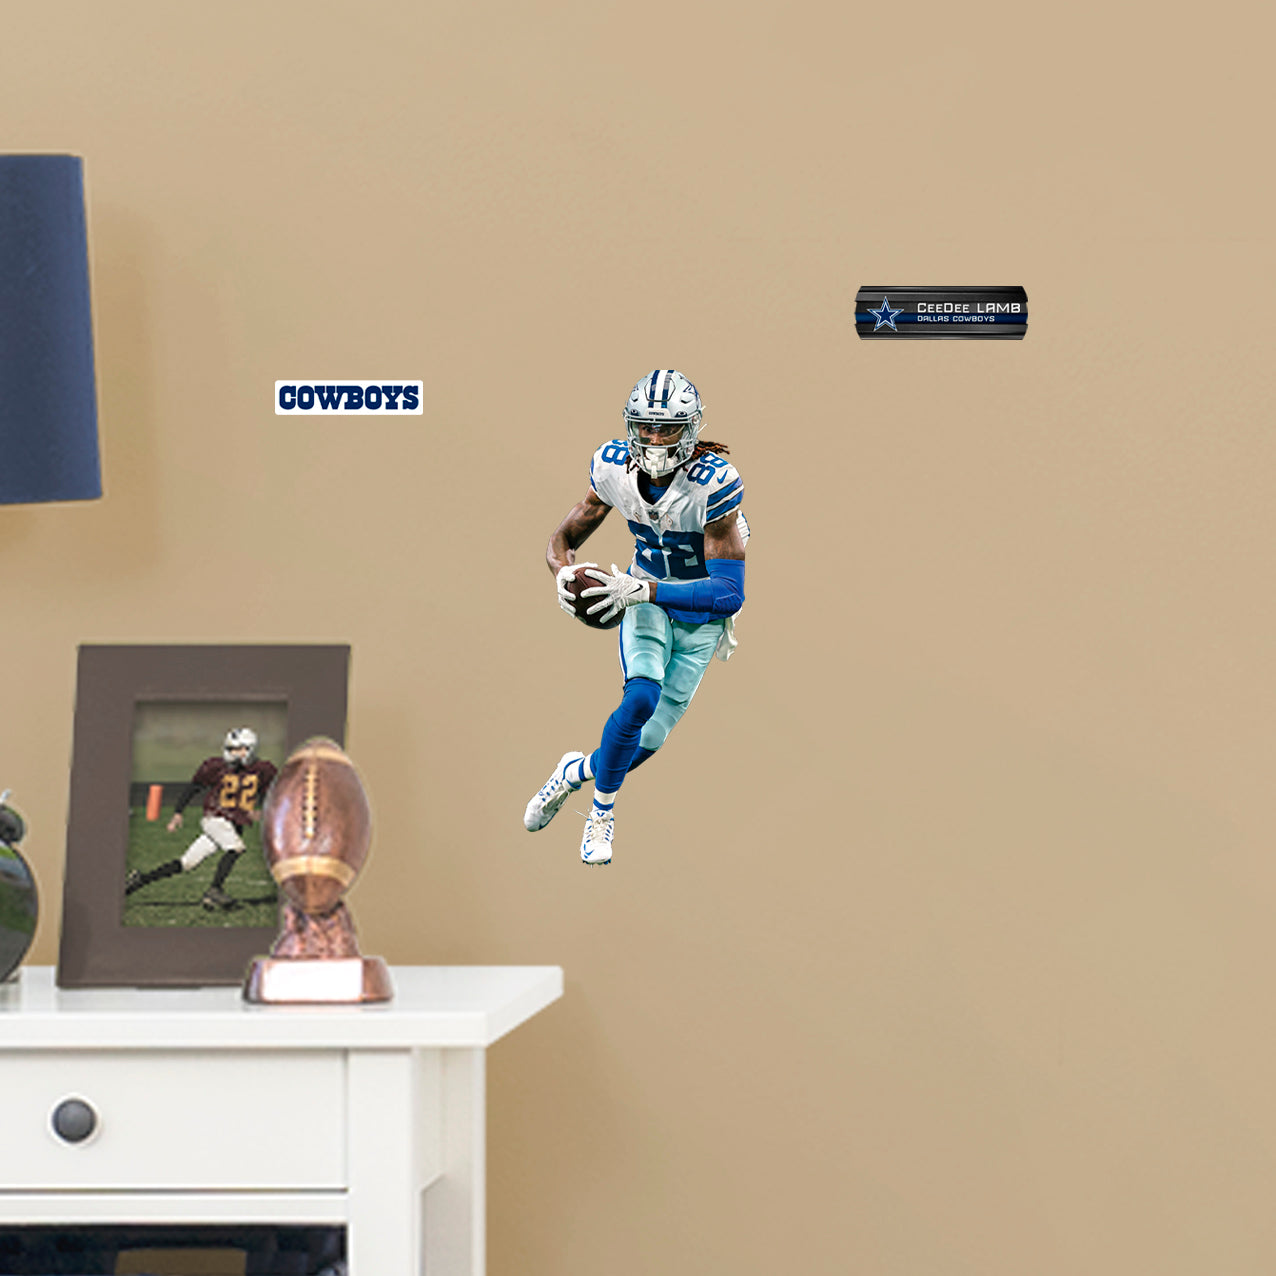 Dallas Cowboys: CeeDee Lamb 2022 - NFL Removable Adhesive Wall Decal Giant Athlete +2 Wall Decals 26W x 51H